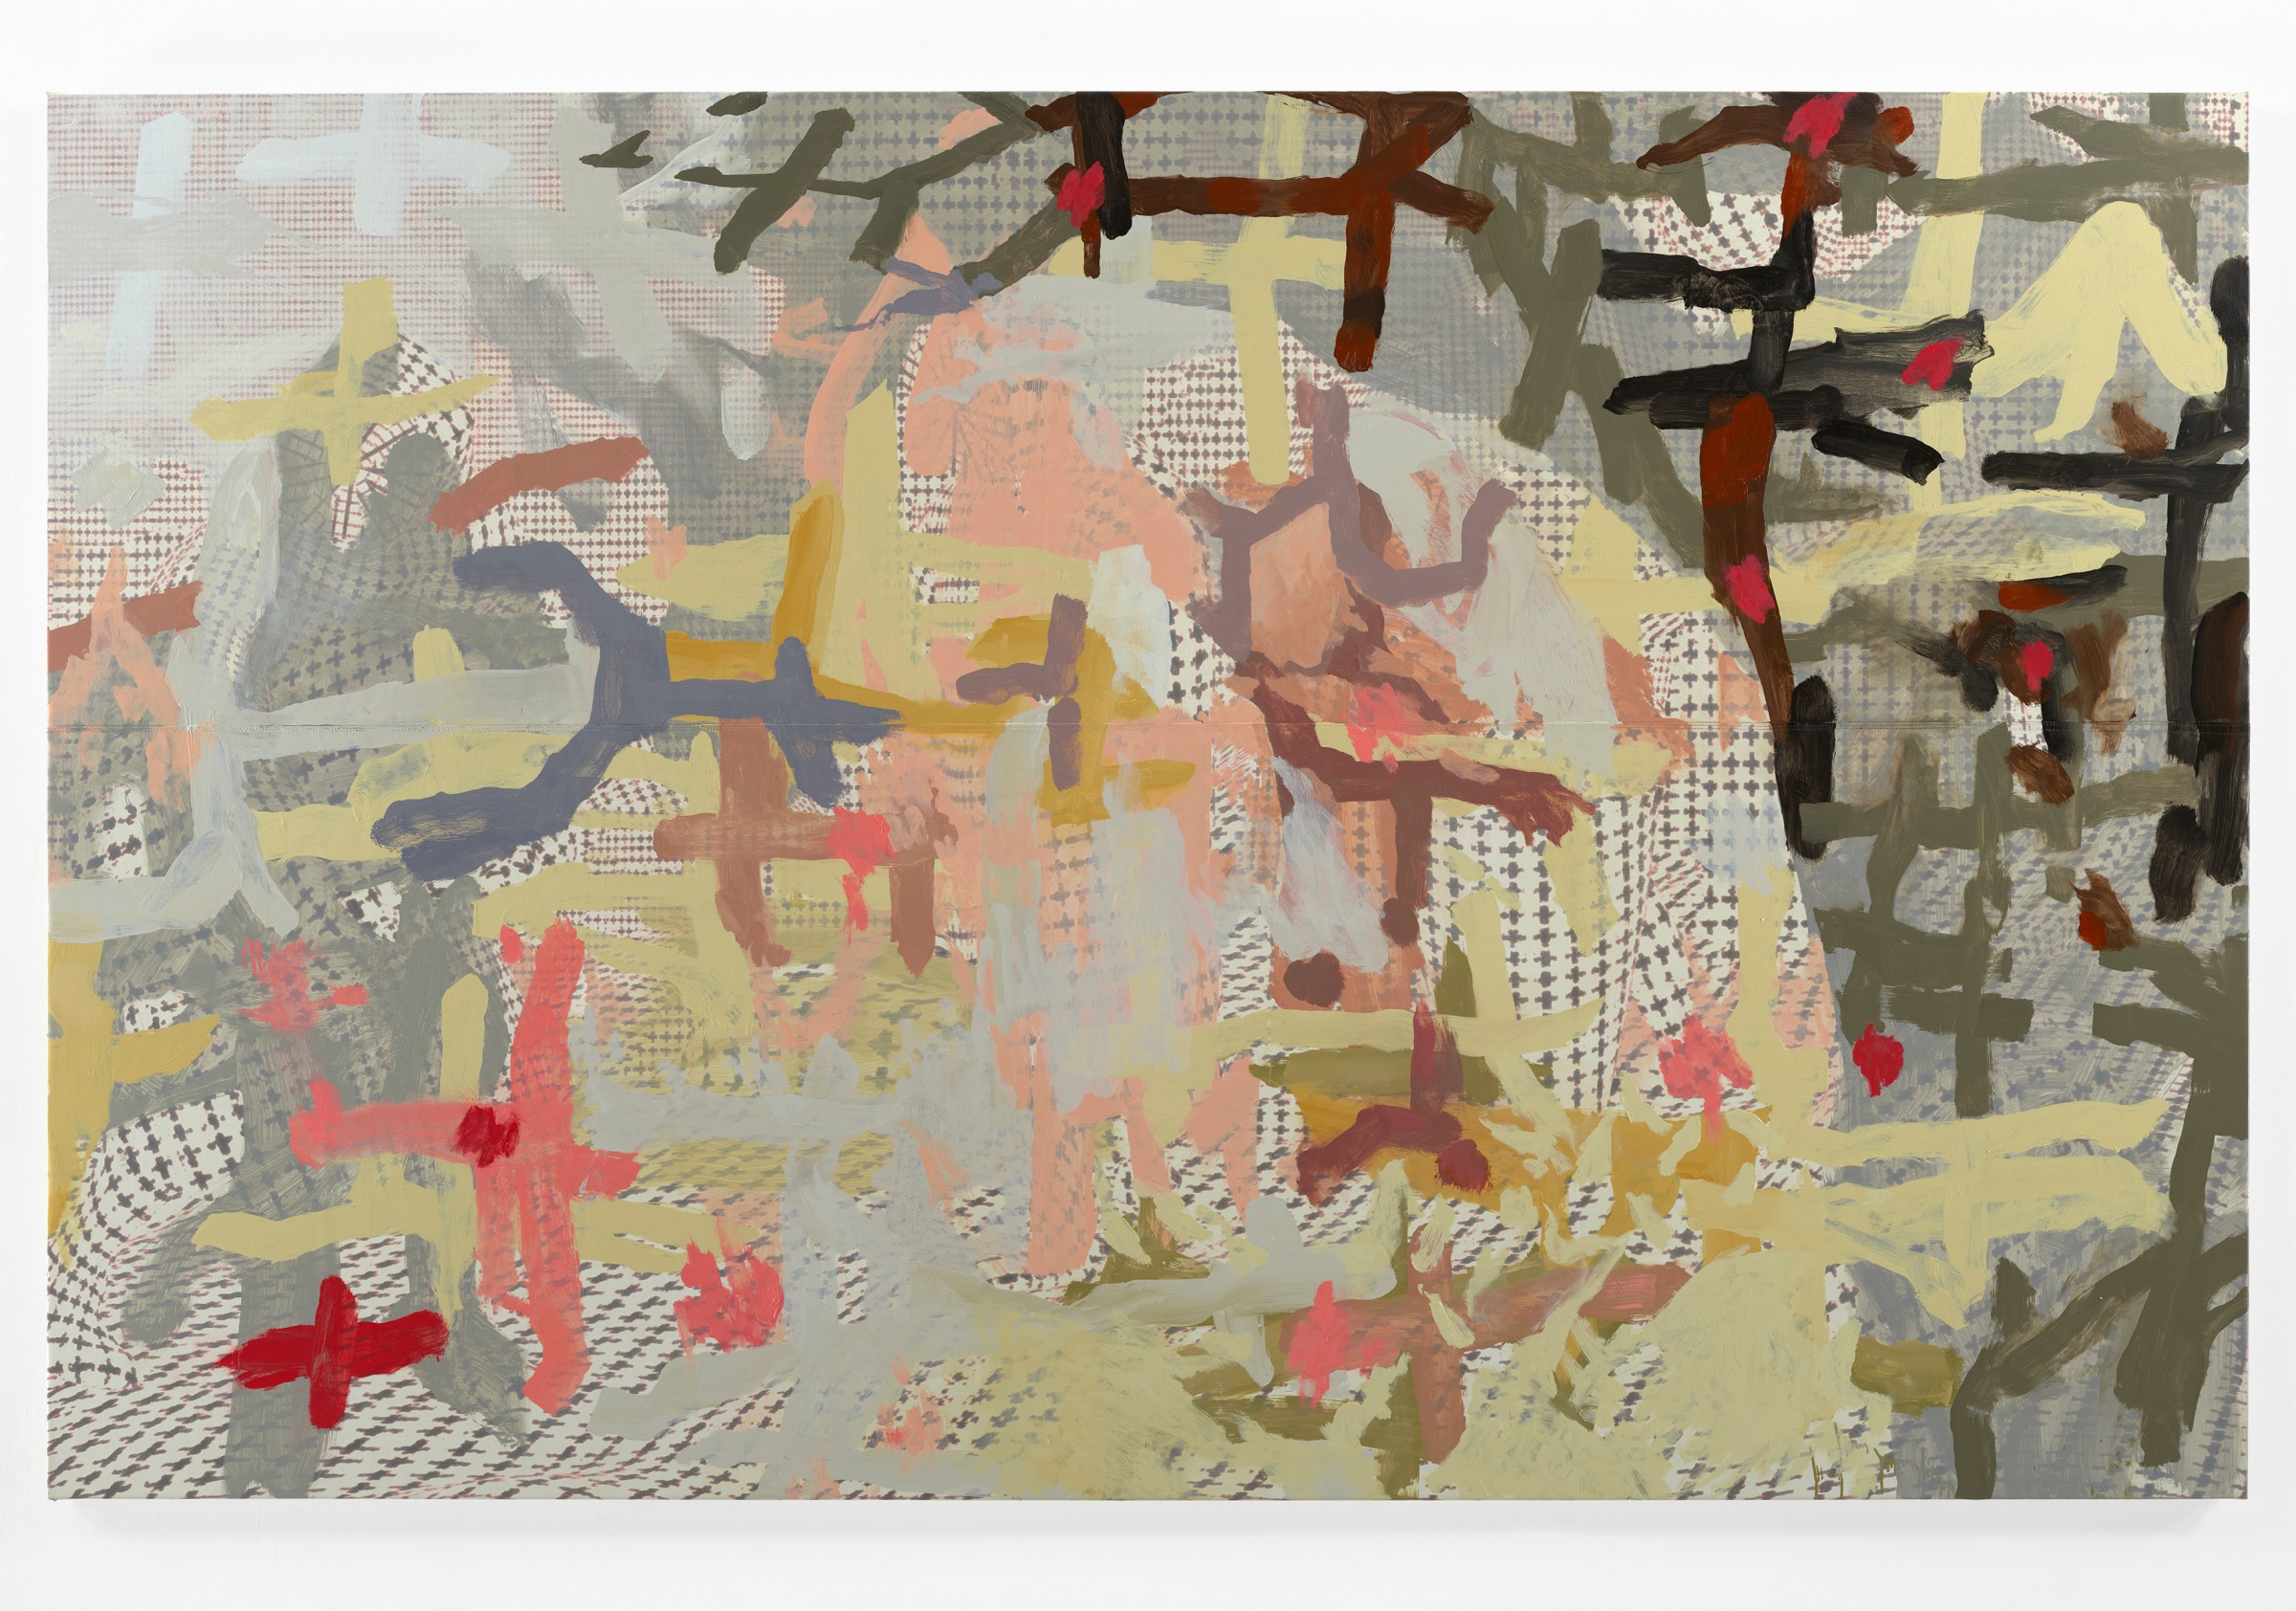 Toby Ziegler, Where things stand, 2022
oil, inkjet, and gesso on canvas
201 x 314 x 5 cm.; 79 1/8 x 123 5/8 x 2 in.
